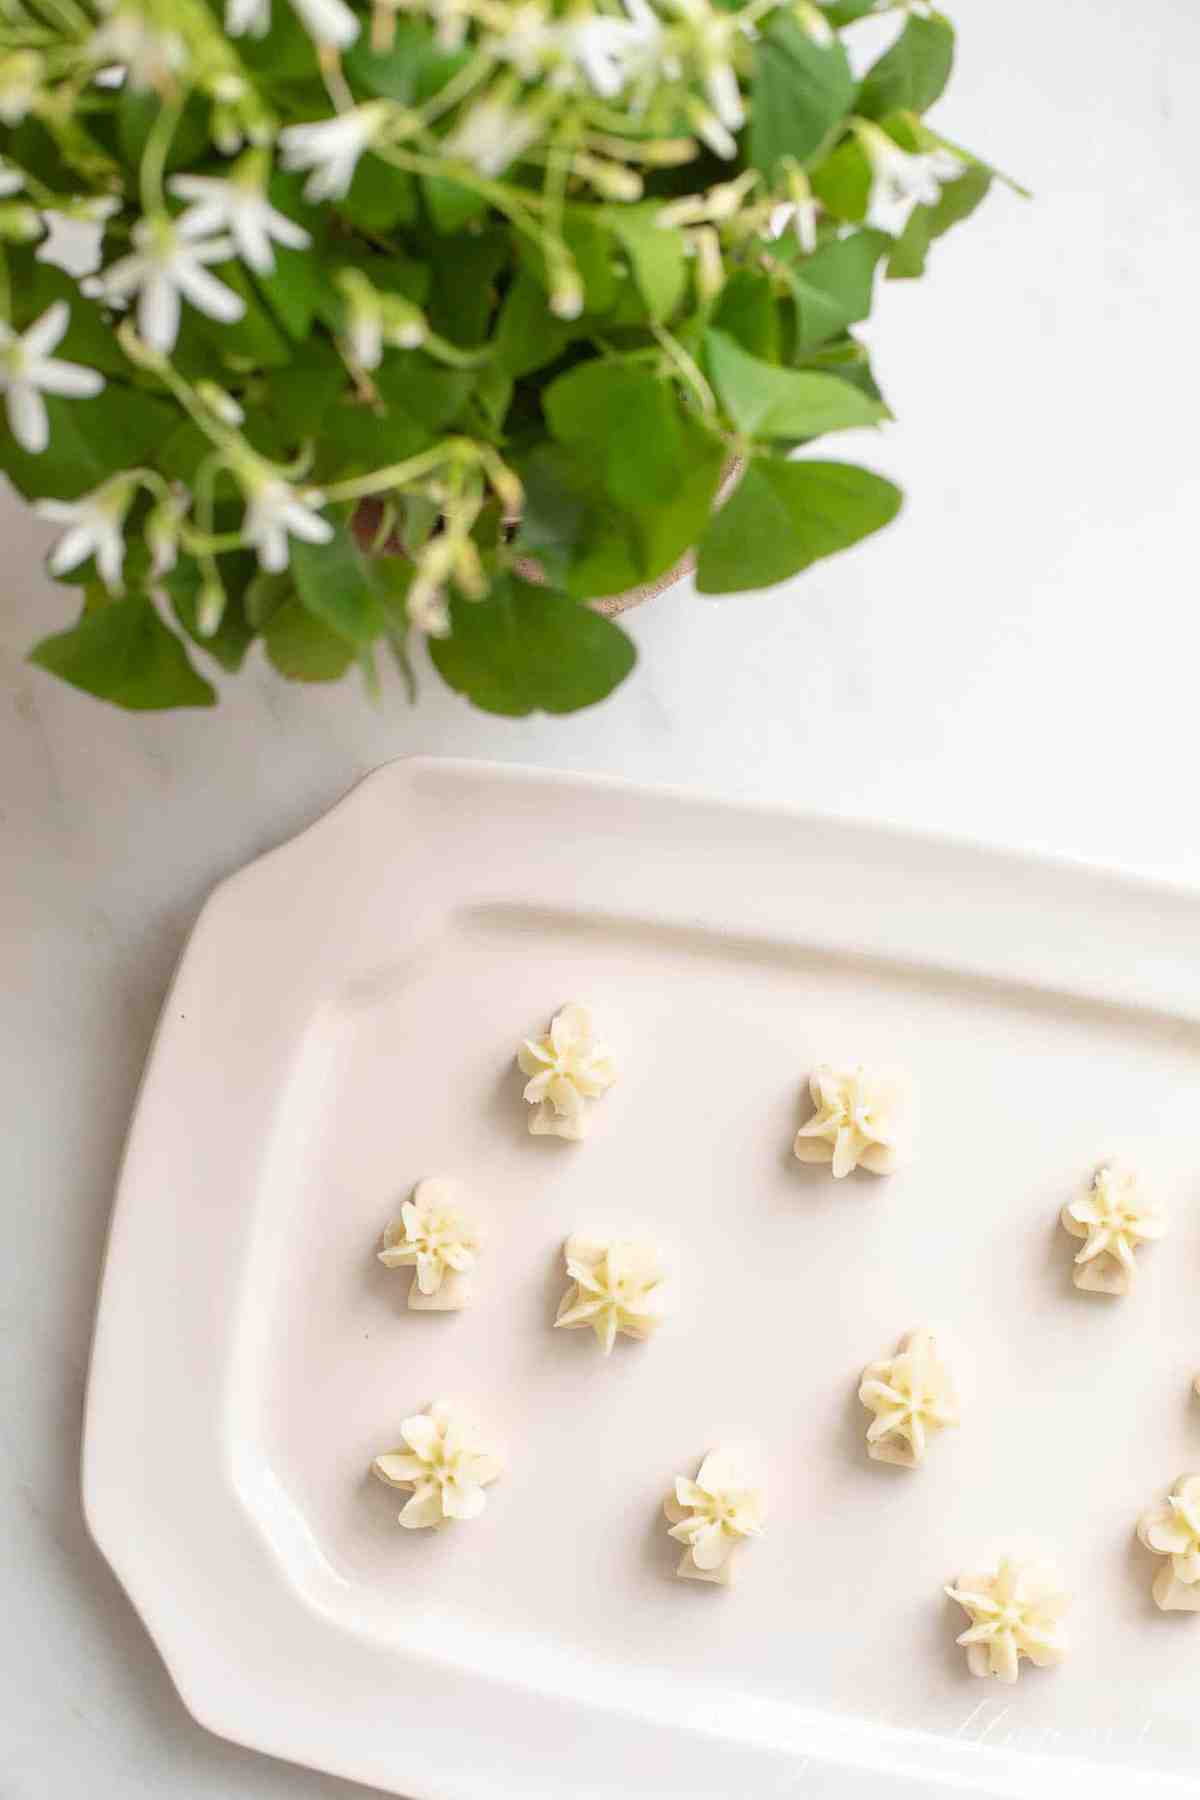 Tiny key lime cookies with frosting on a white surface.